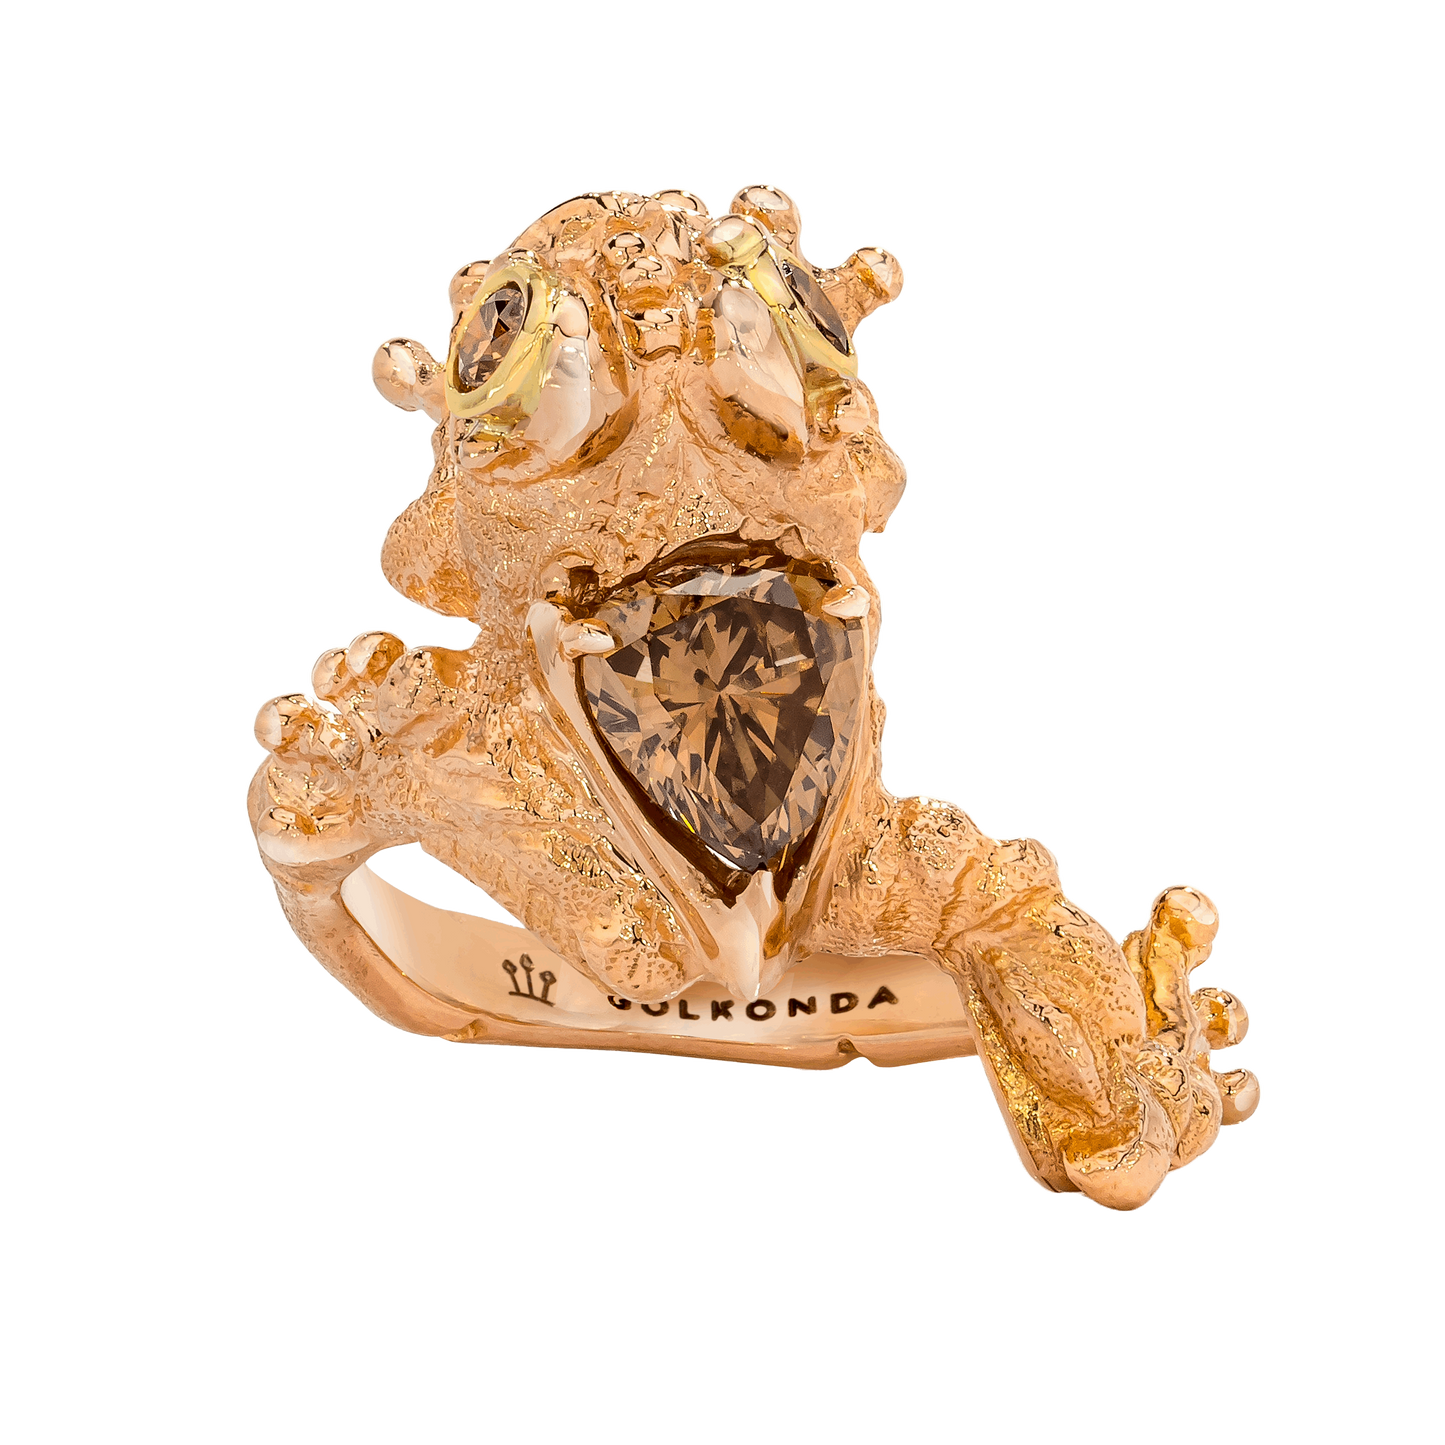 FROG RING, 1.25 CTTW, 1.05 CT CINAMMON COLORED PEAR SHAPE DIAMOND, 18K ROSE GOLD